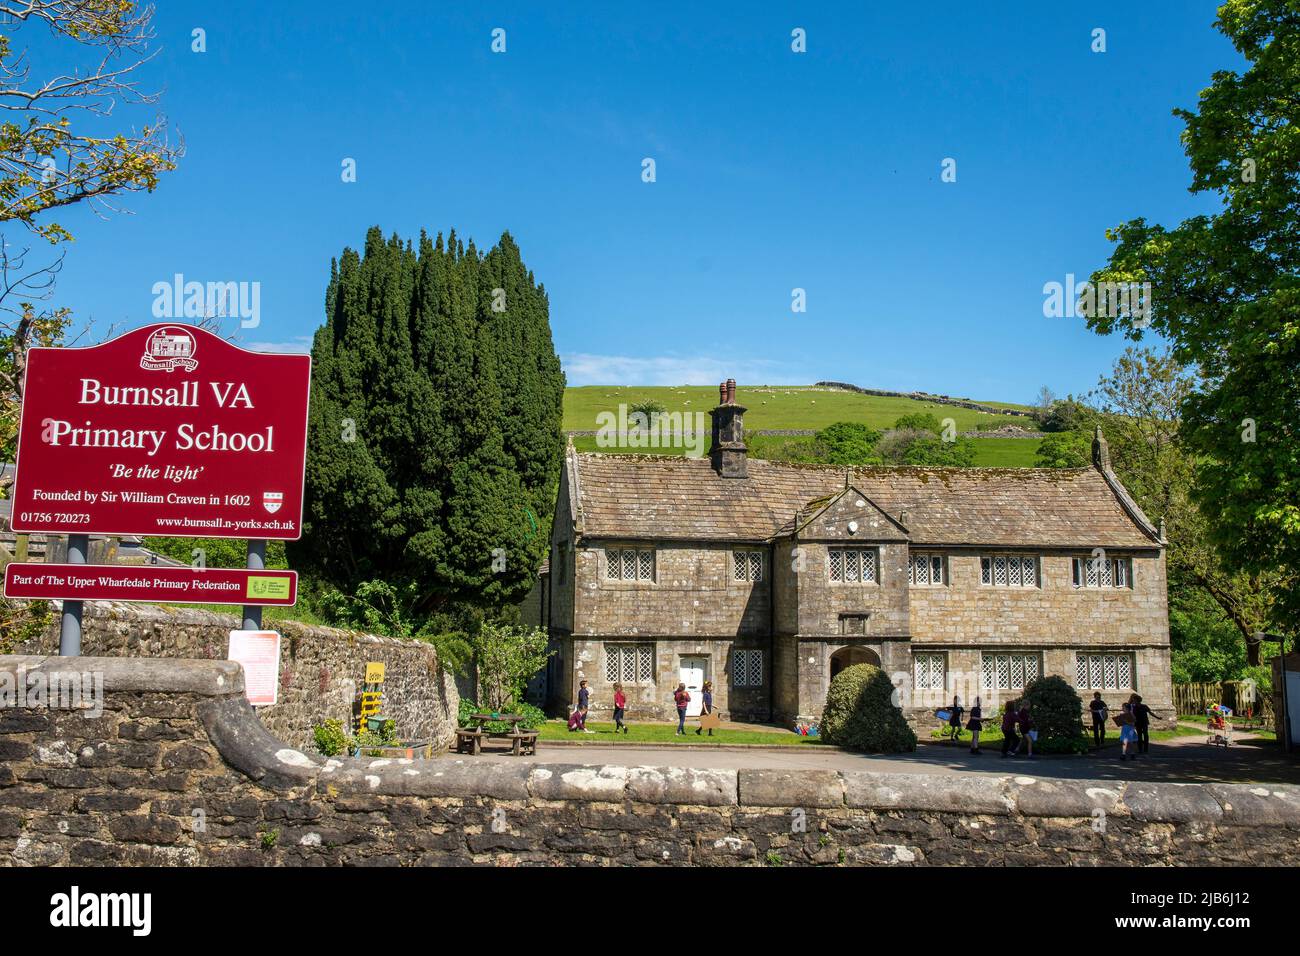 Burnsall VA Primary School founded by Sir William Craven 1602 in the Craven district of North Yorkshire, England. It is situated on the River Wharfe i Stock Photo